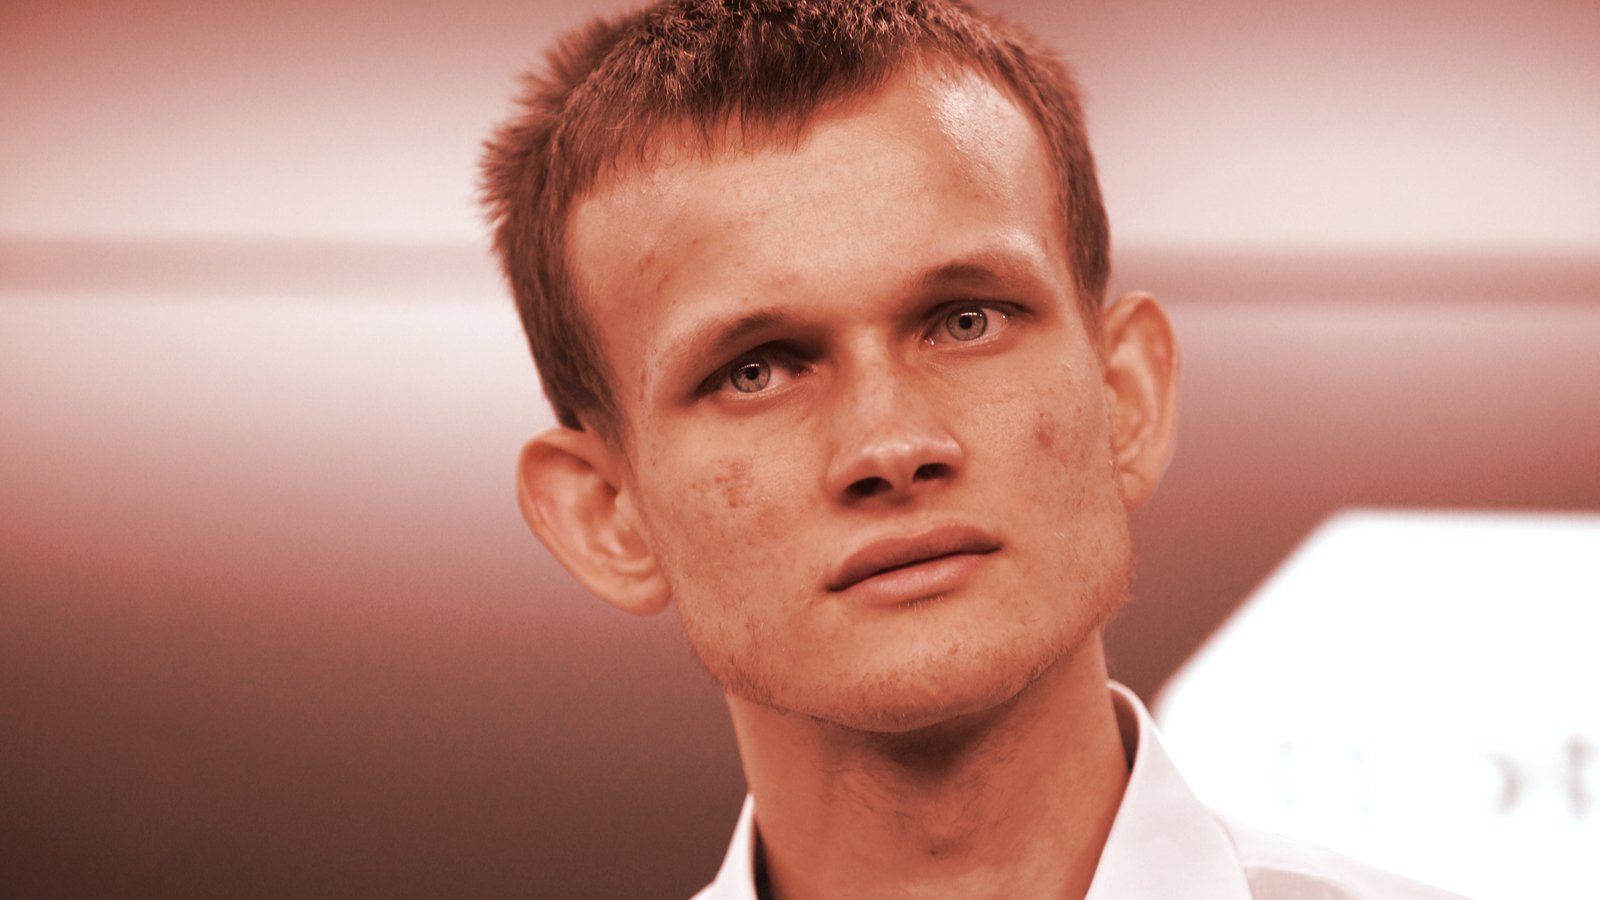 Get Ready for the 'Scourge': Inside Vitalik Buterin’s Updated Ethereum Plans